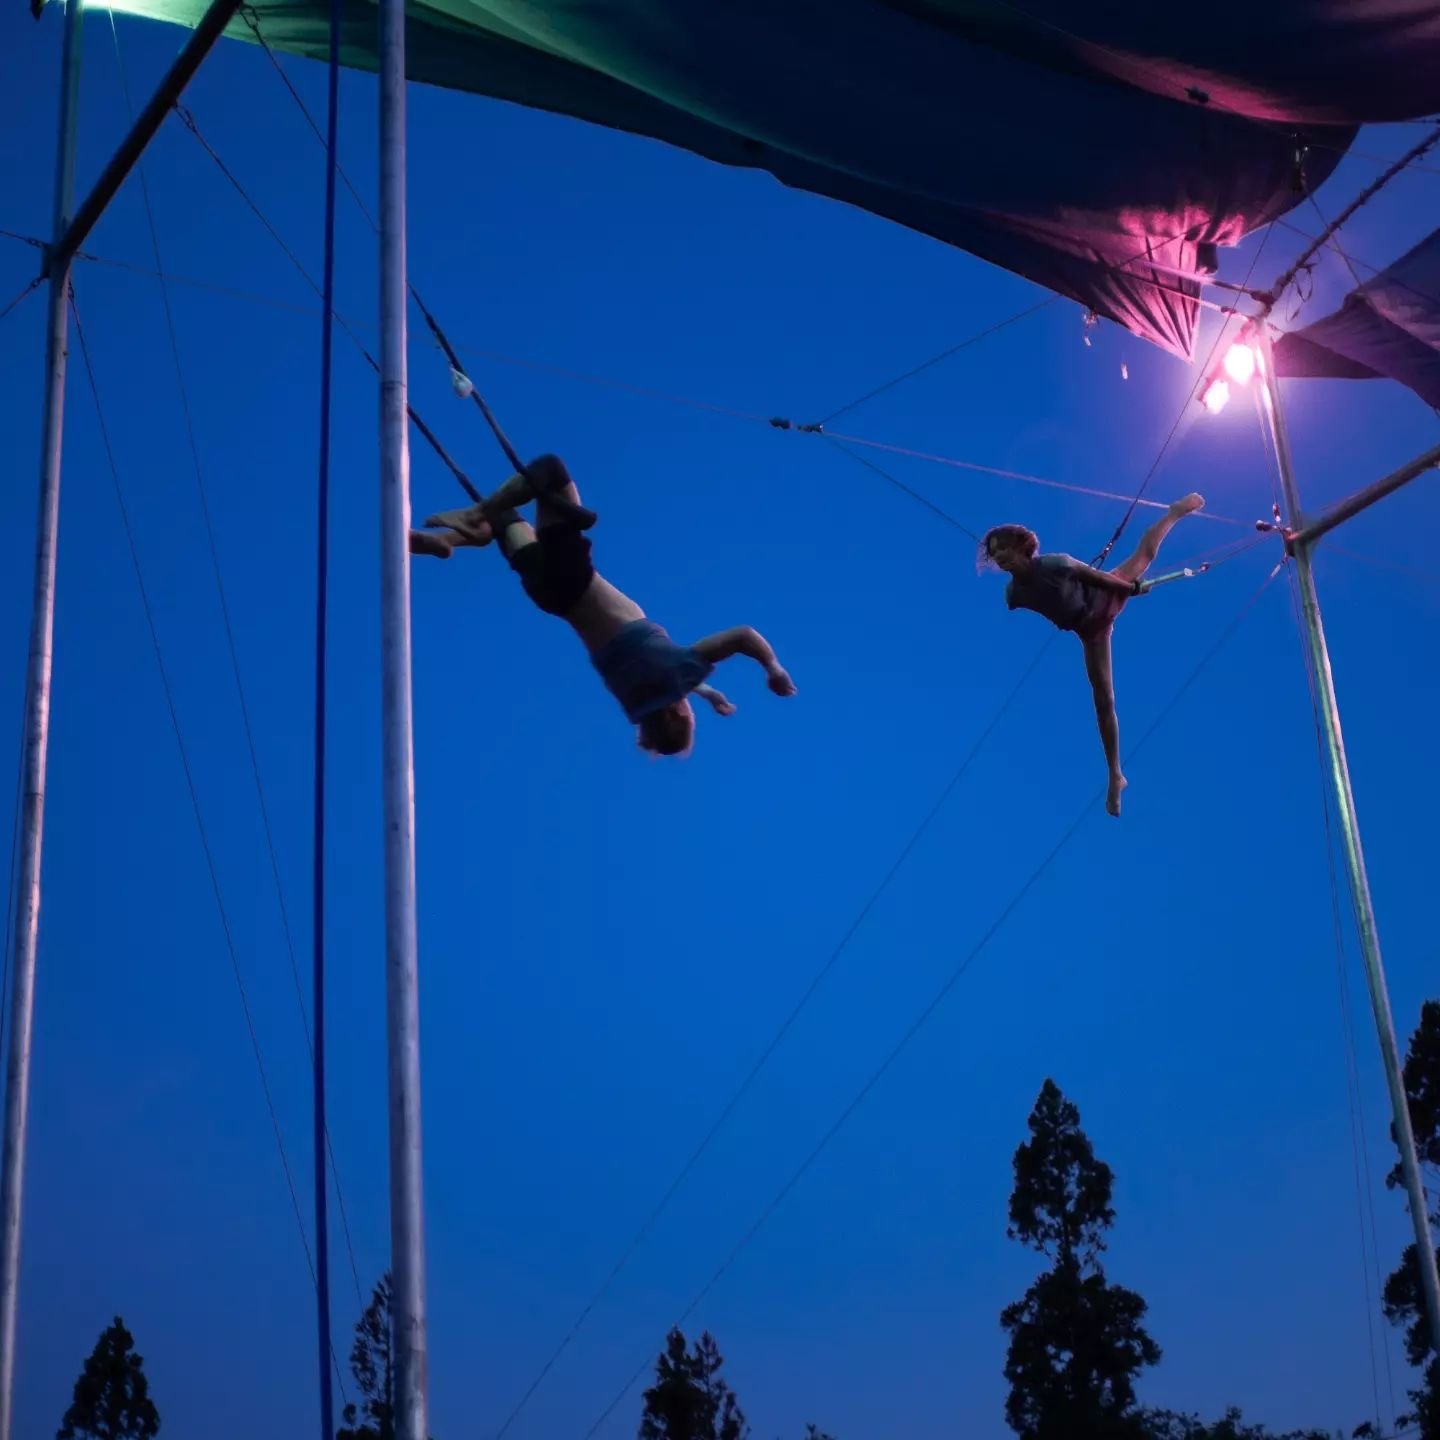 Check out these incredible night shots from @jason_nower 

If you want to #fly under the lights, we have evening classes available including an intensive #flyingtrapeze #workshop coming up August 21-25! Sign up before August 1st to receive a custom t